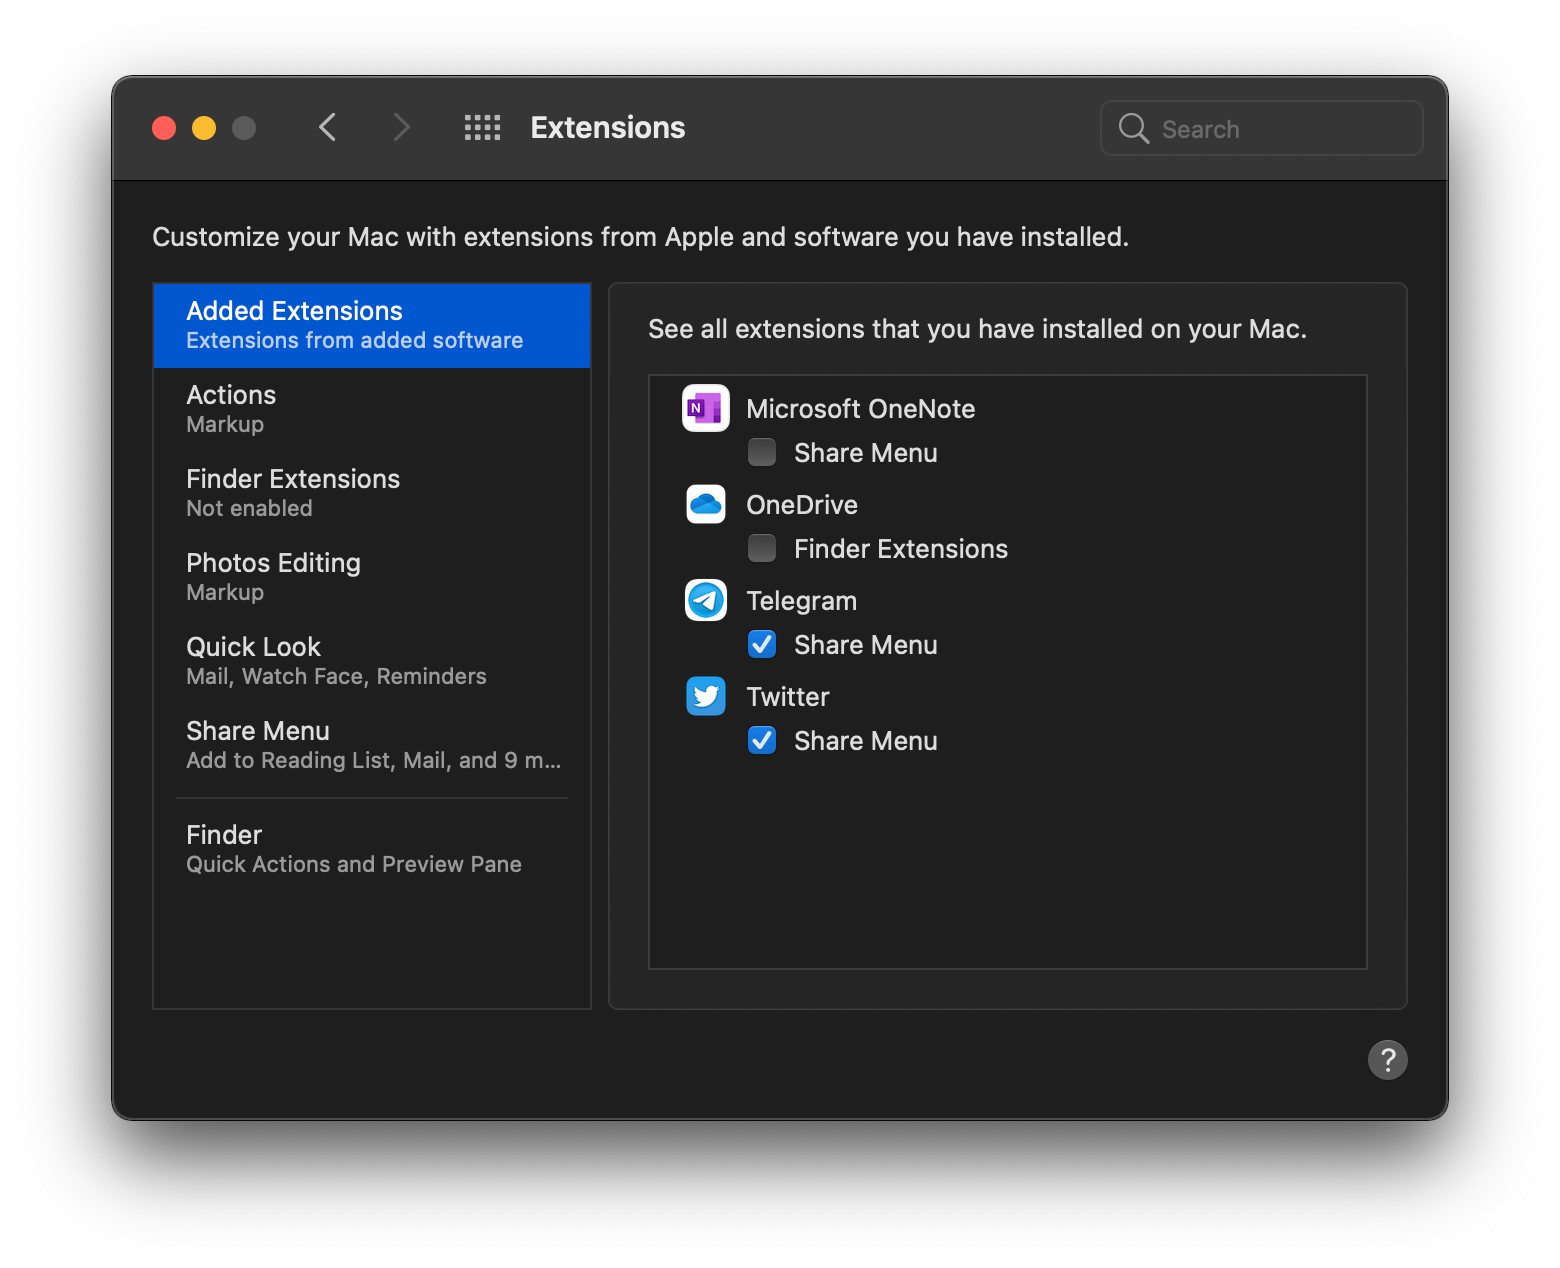 Extensions settings on macOS